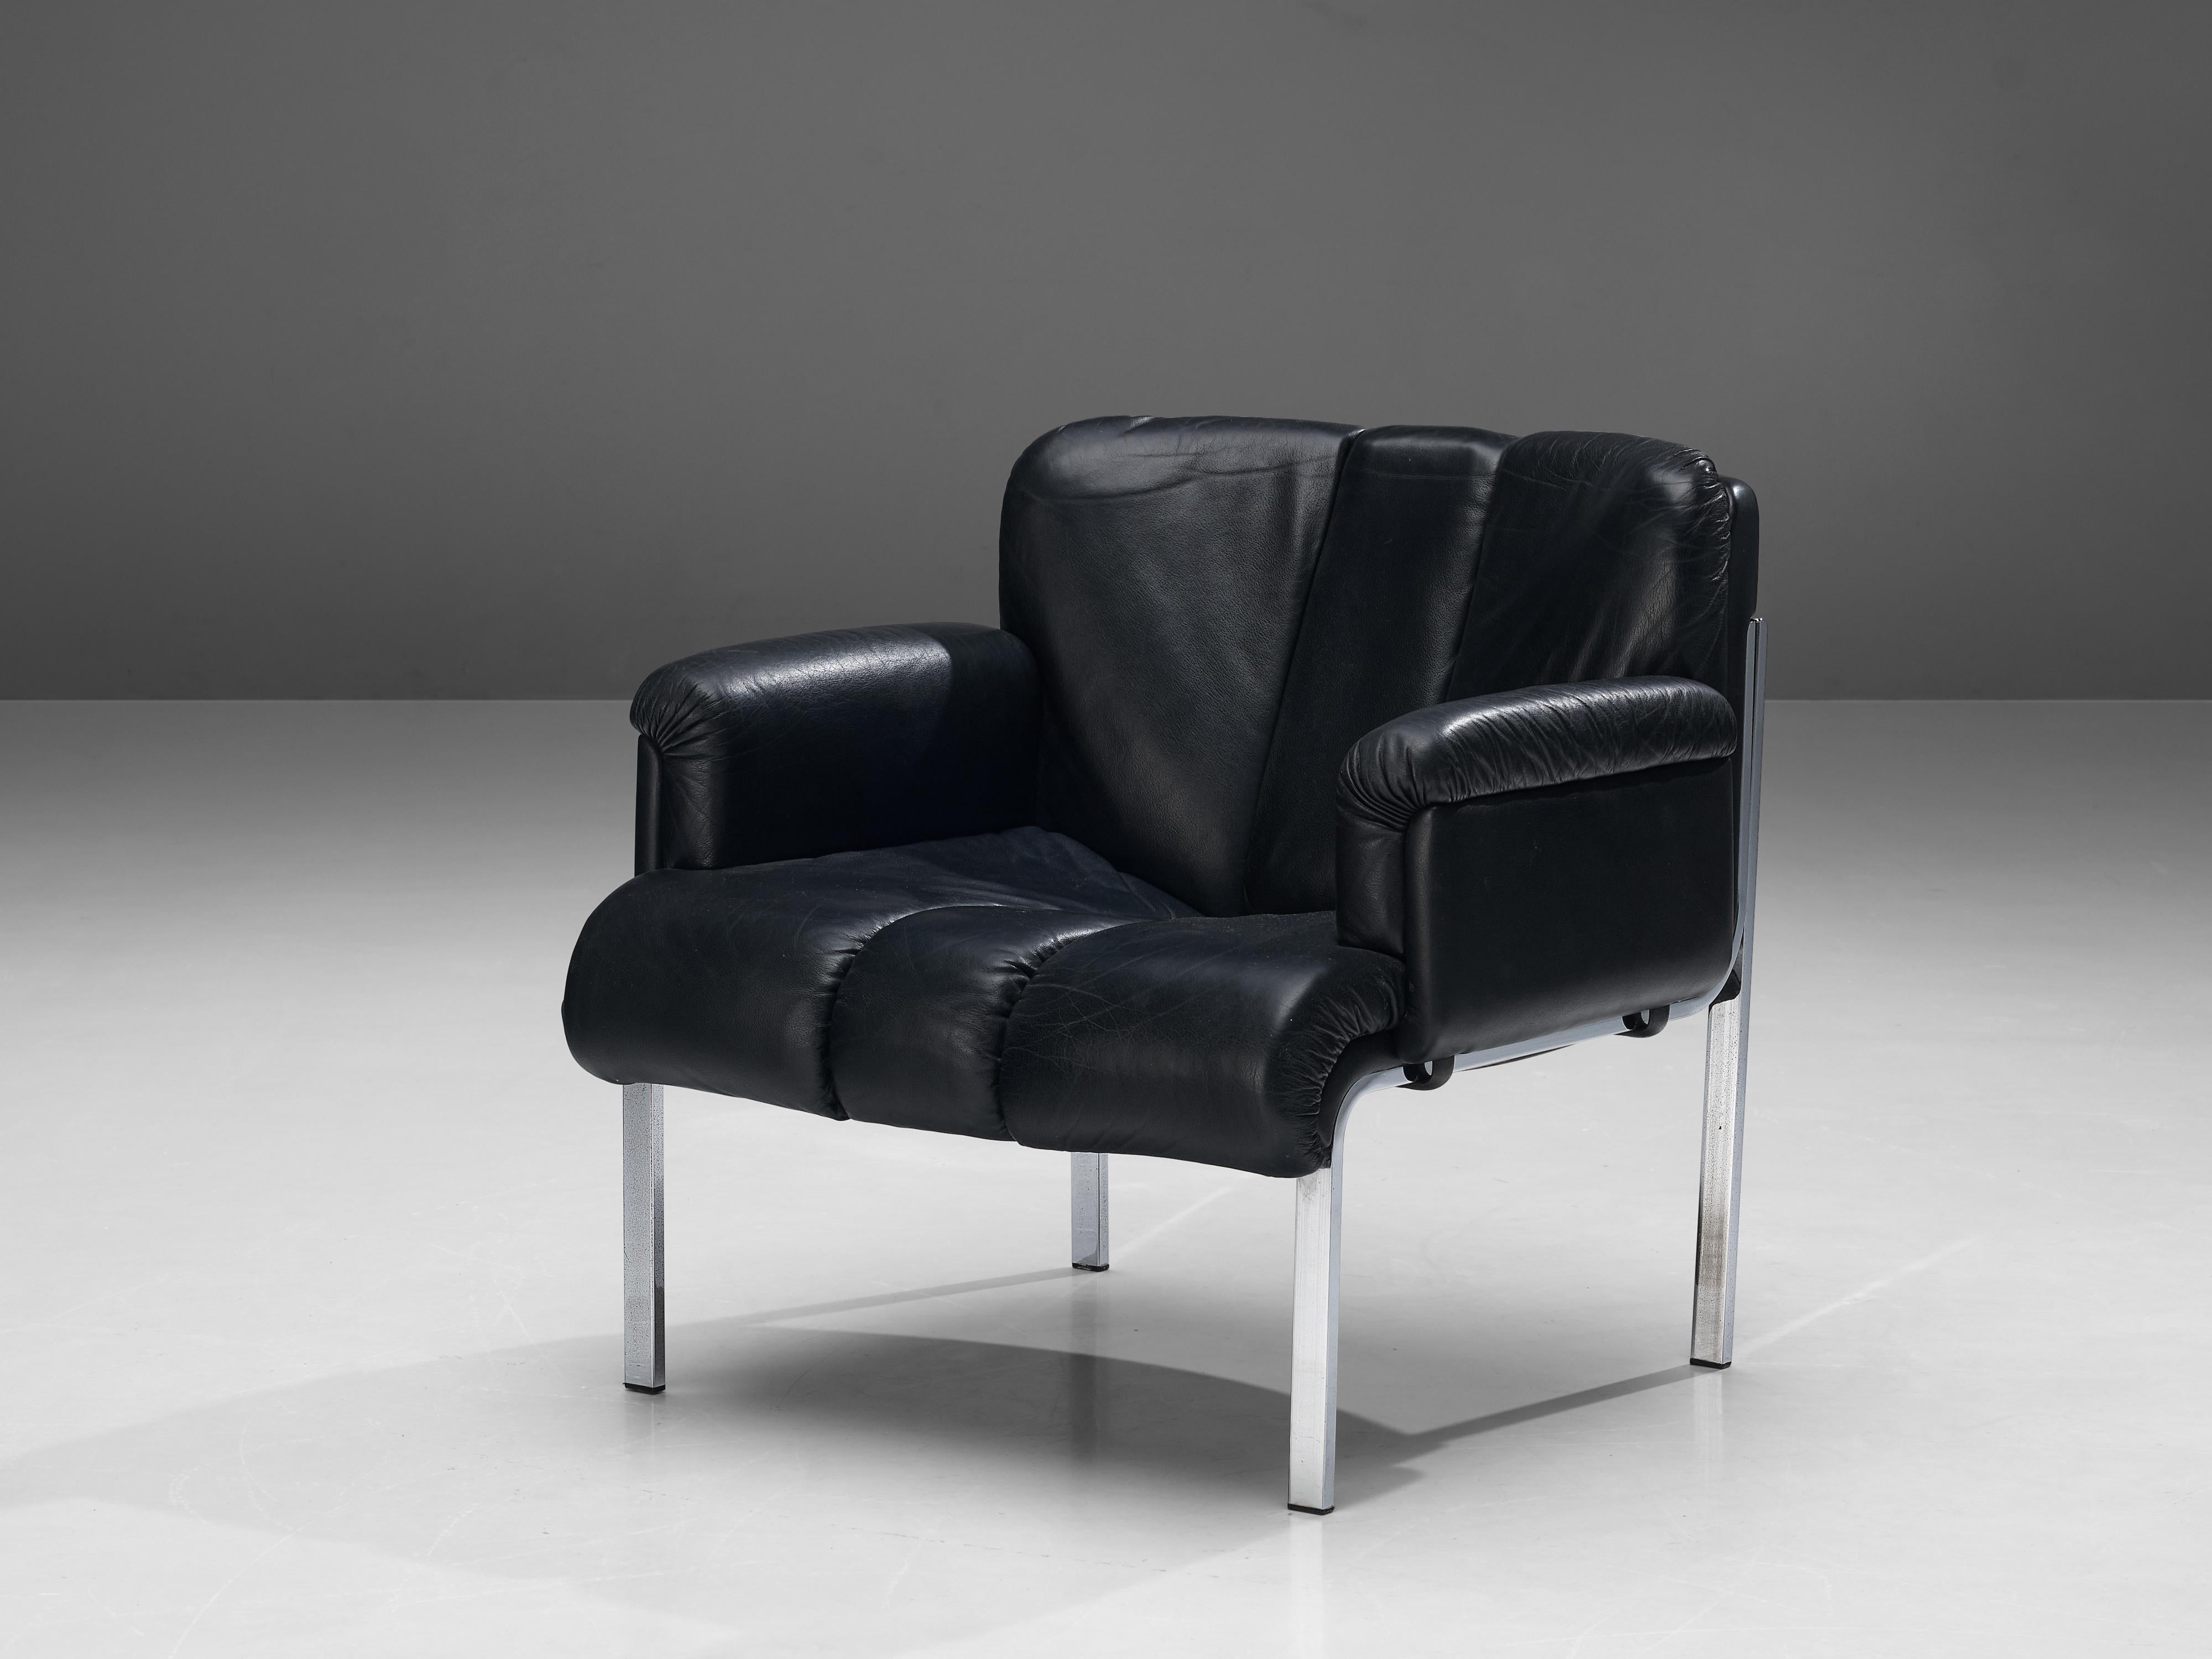 Hans Eichenberger for Girsberger, lounge chair model ‘Eurochair’, leather, chromed steel, Switzerland, 1970s 

This lounge chair is created by the Swiss designer Hans Eichenberger whose designs can be admired in several permanent design collections,